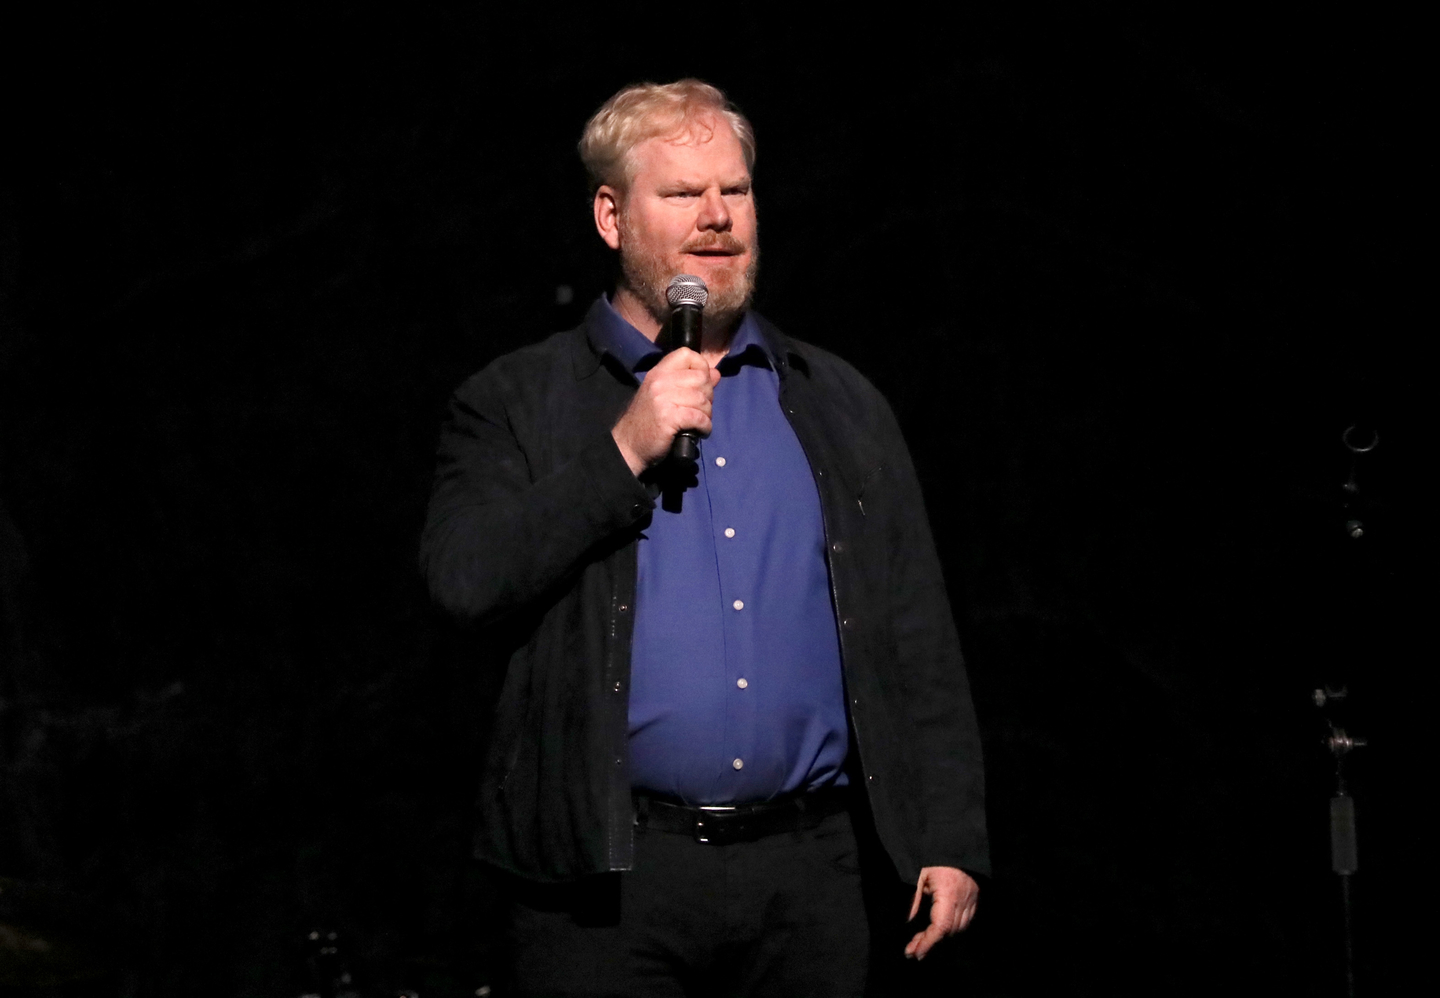 Jim Gaffigan at Audible Impact. Photo by Diego Donamaria/Getty Images for SXSW